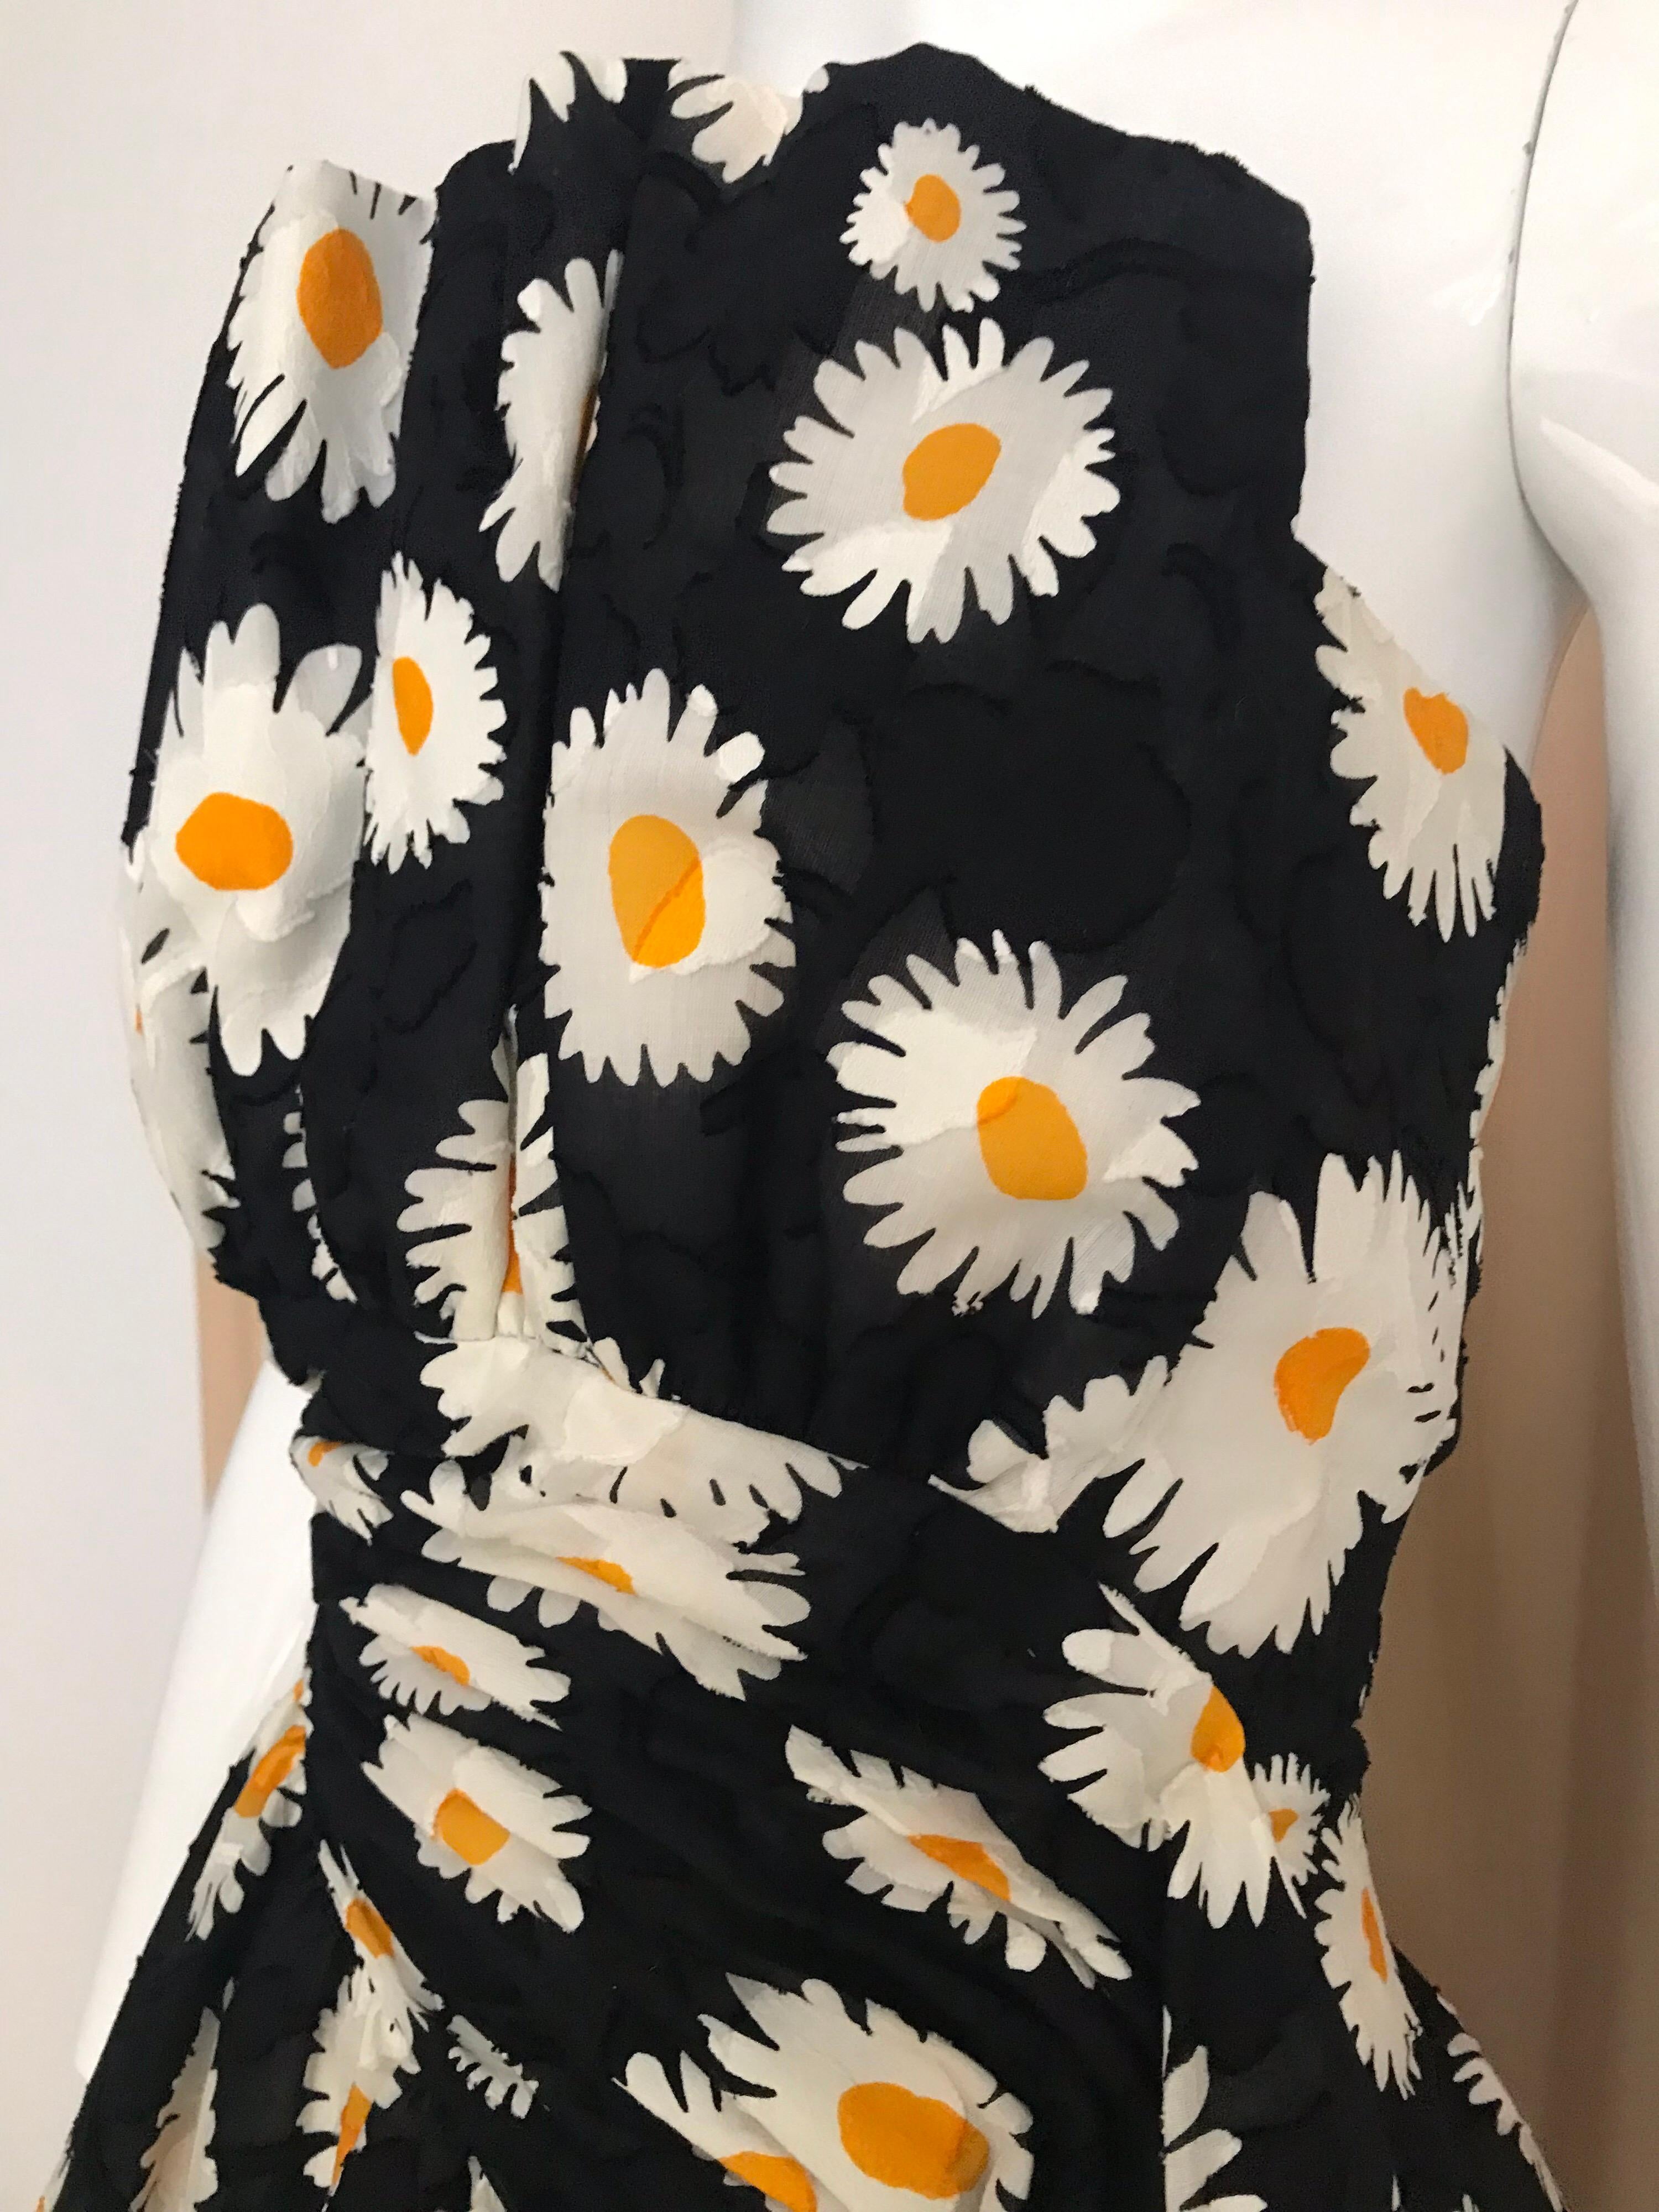 Vintage Arnold Scaasi strapless black and yellow Daisy print cocktail Dress.
Size: 6
Bust: 35.5  inches / Waist 30 inches